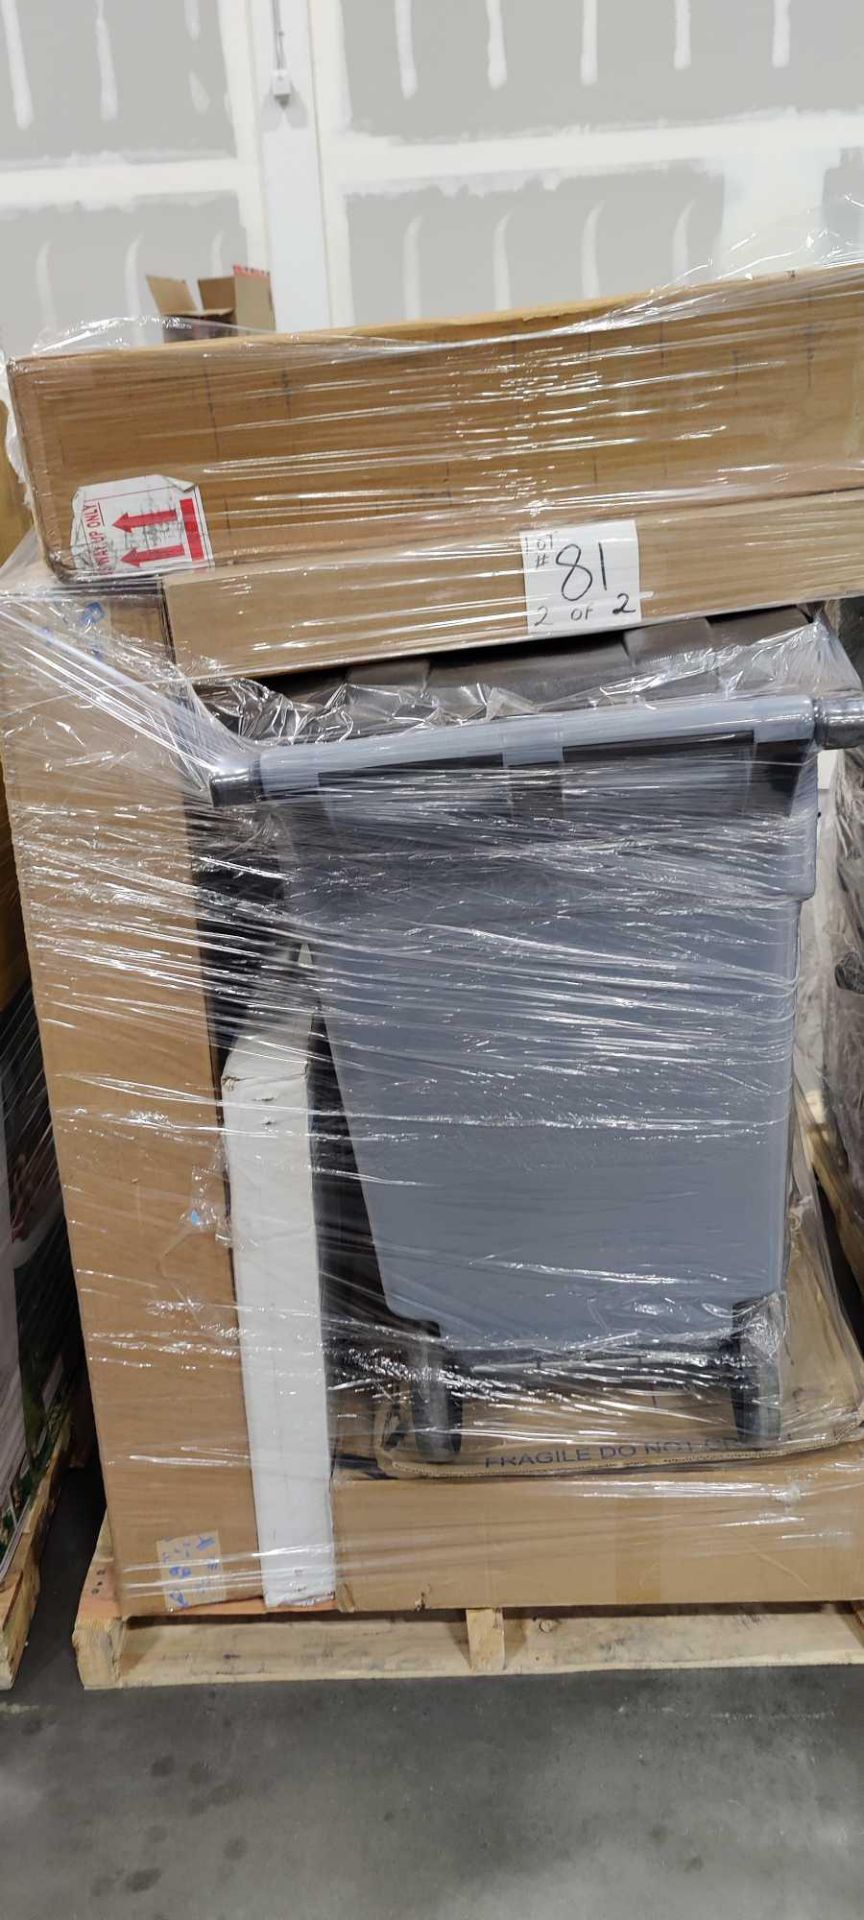 Two Pallets - Image 11 of 16